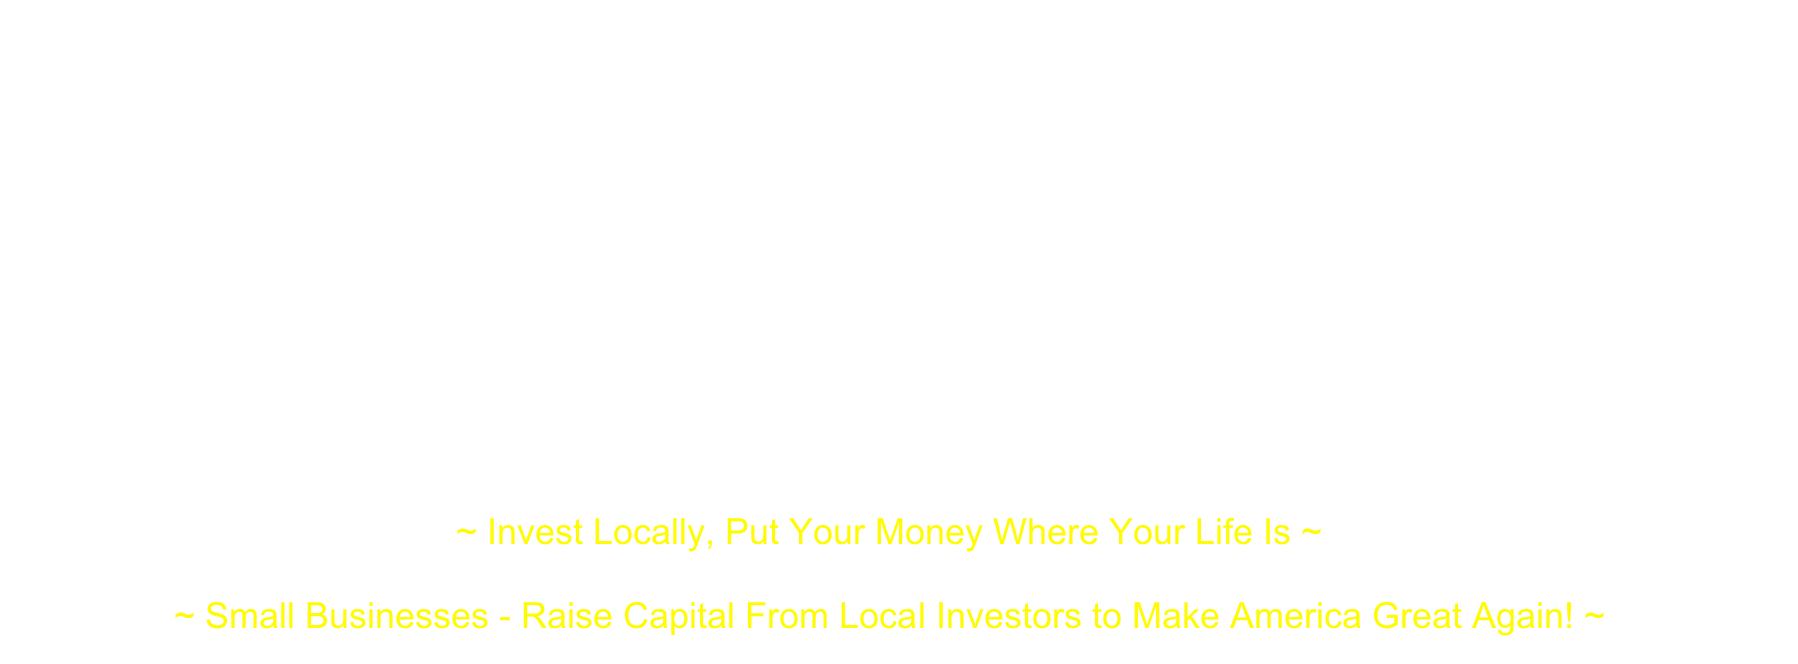  Turned off by what they see as the failures of traditional finance, a new breed of investor is turning to small investment clubs and networks through which they can make loans, equity investments or a little of both in “Local” (city, town, county or a defined primary statistical area) nearby businesses…This is a way for both sophisticated and small (non-accredited) investors to put their money in Main Street businesses and help them grow ~ “The Local Small Business Investing Revolution” - www.cnbc.com/2016/02/16/reaping-profits-in-the-local-investing-revolution-in-us.html  "All told, against an otherwise difficult investing backdrop, the rewards of investing ‘local’ outweigh the risks - Small business investments offer a unique opportunity to generate attractive returns that are less correlated to public stock and bond markets." ~ “Invest Local” - www.huffingtonpost.com/kevin-harmon/invest-local_b_7586582.html “Entrepreneurs and their small enterprises are responsible for almost all the economic growth of the United States” ~ Ronald Reagan“Make America Great Again!” ~ President Donald Trump ~ Invest Locally, Put Your Money Where Your Life Is ~  ~ Small Businesses - Raise Capital From Local Investors to Make America Great Again! ~